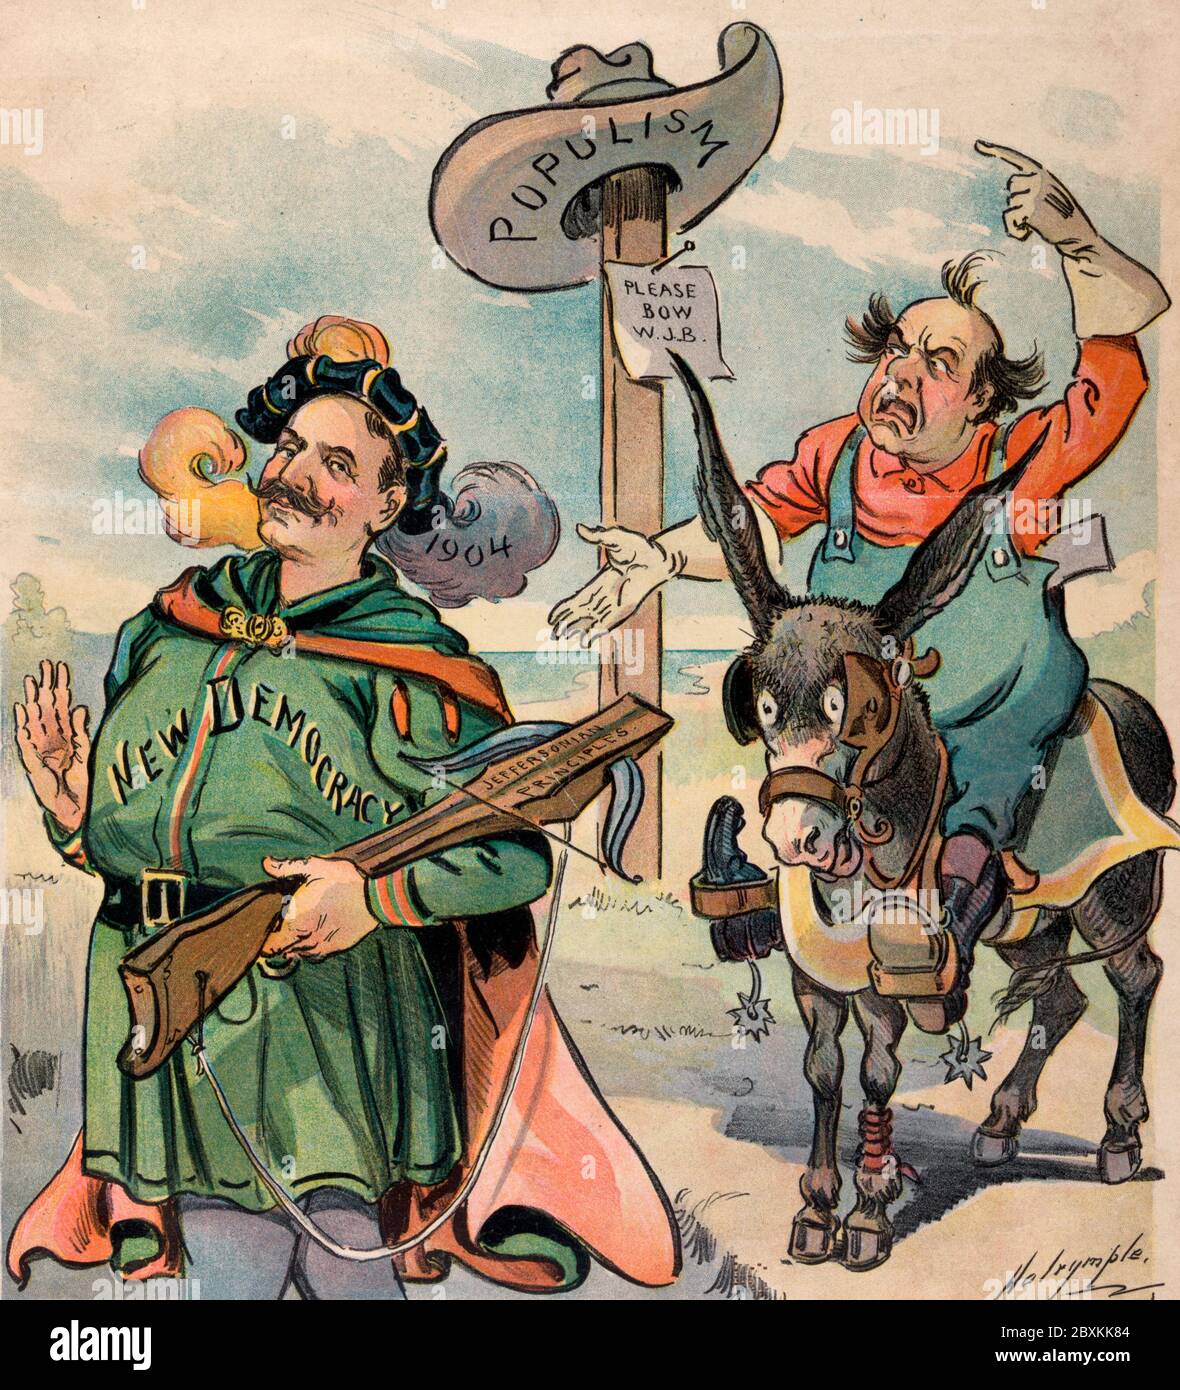 Never again!-  Illustration shows a man, possibly Alton B. Parker, labeled New Democracy and wearing a hat with plume labeled 1904 and holding a crossbow labeled Jeffersonian Principles; William Jennings Bryan sits on the Democratic donkey, speaking and gesticulating wildly with his hands, his hat labeled Populism hangs on a post on which is a note that states Please Bow W.J.B. Political Cartoon, 1901 Stock Photo